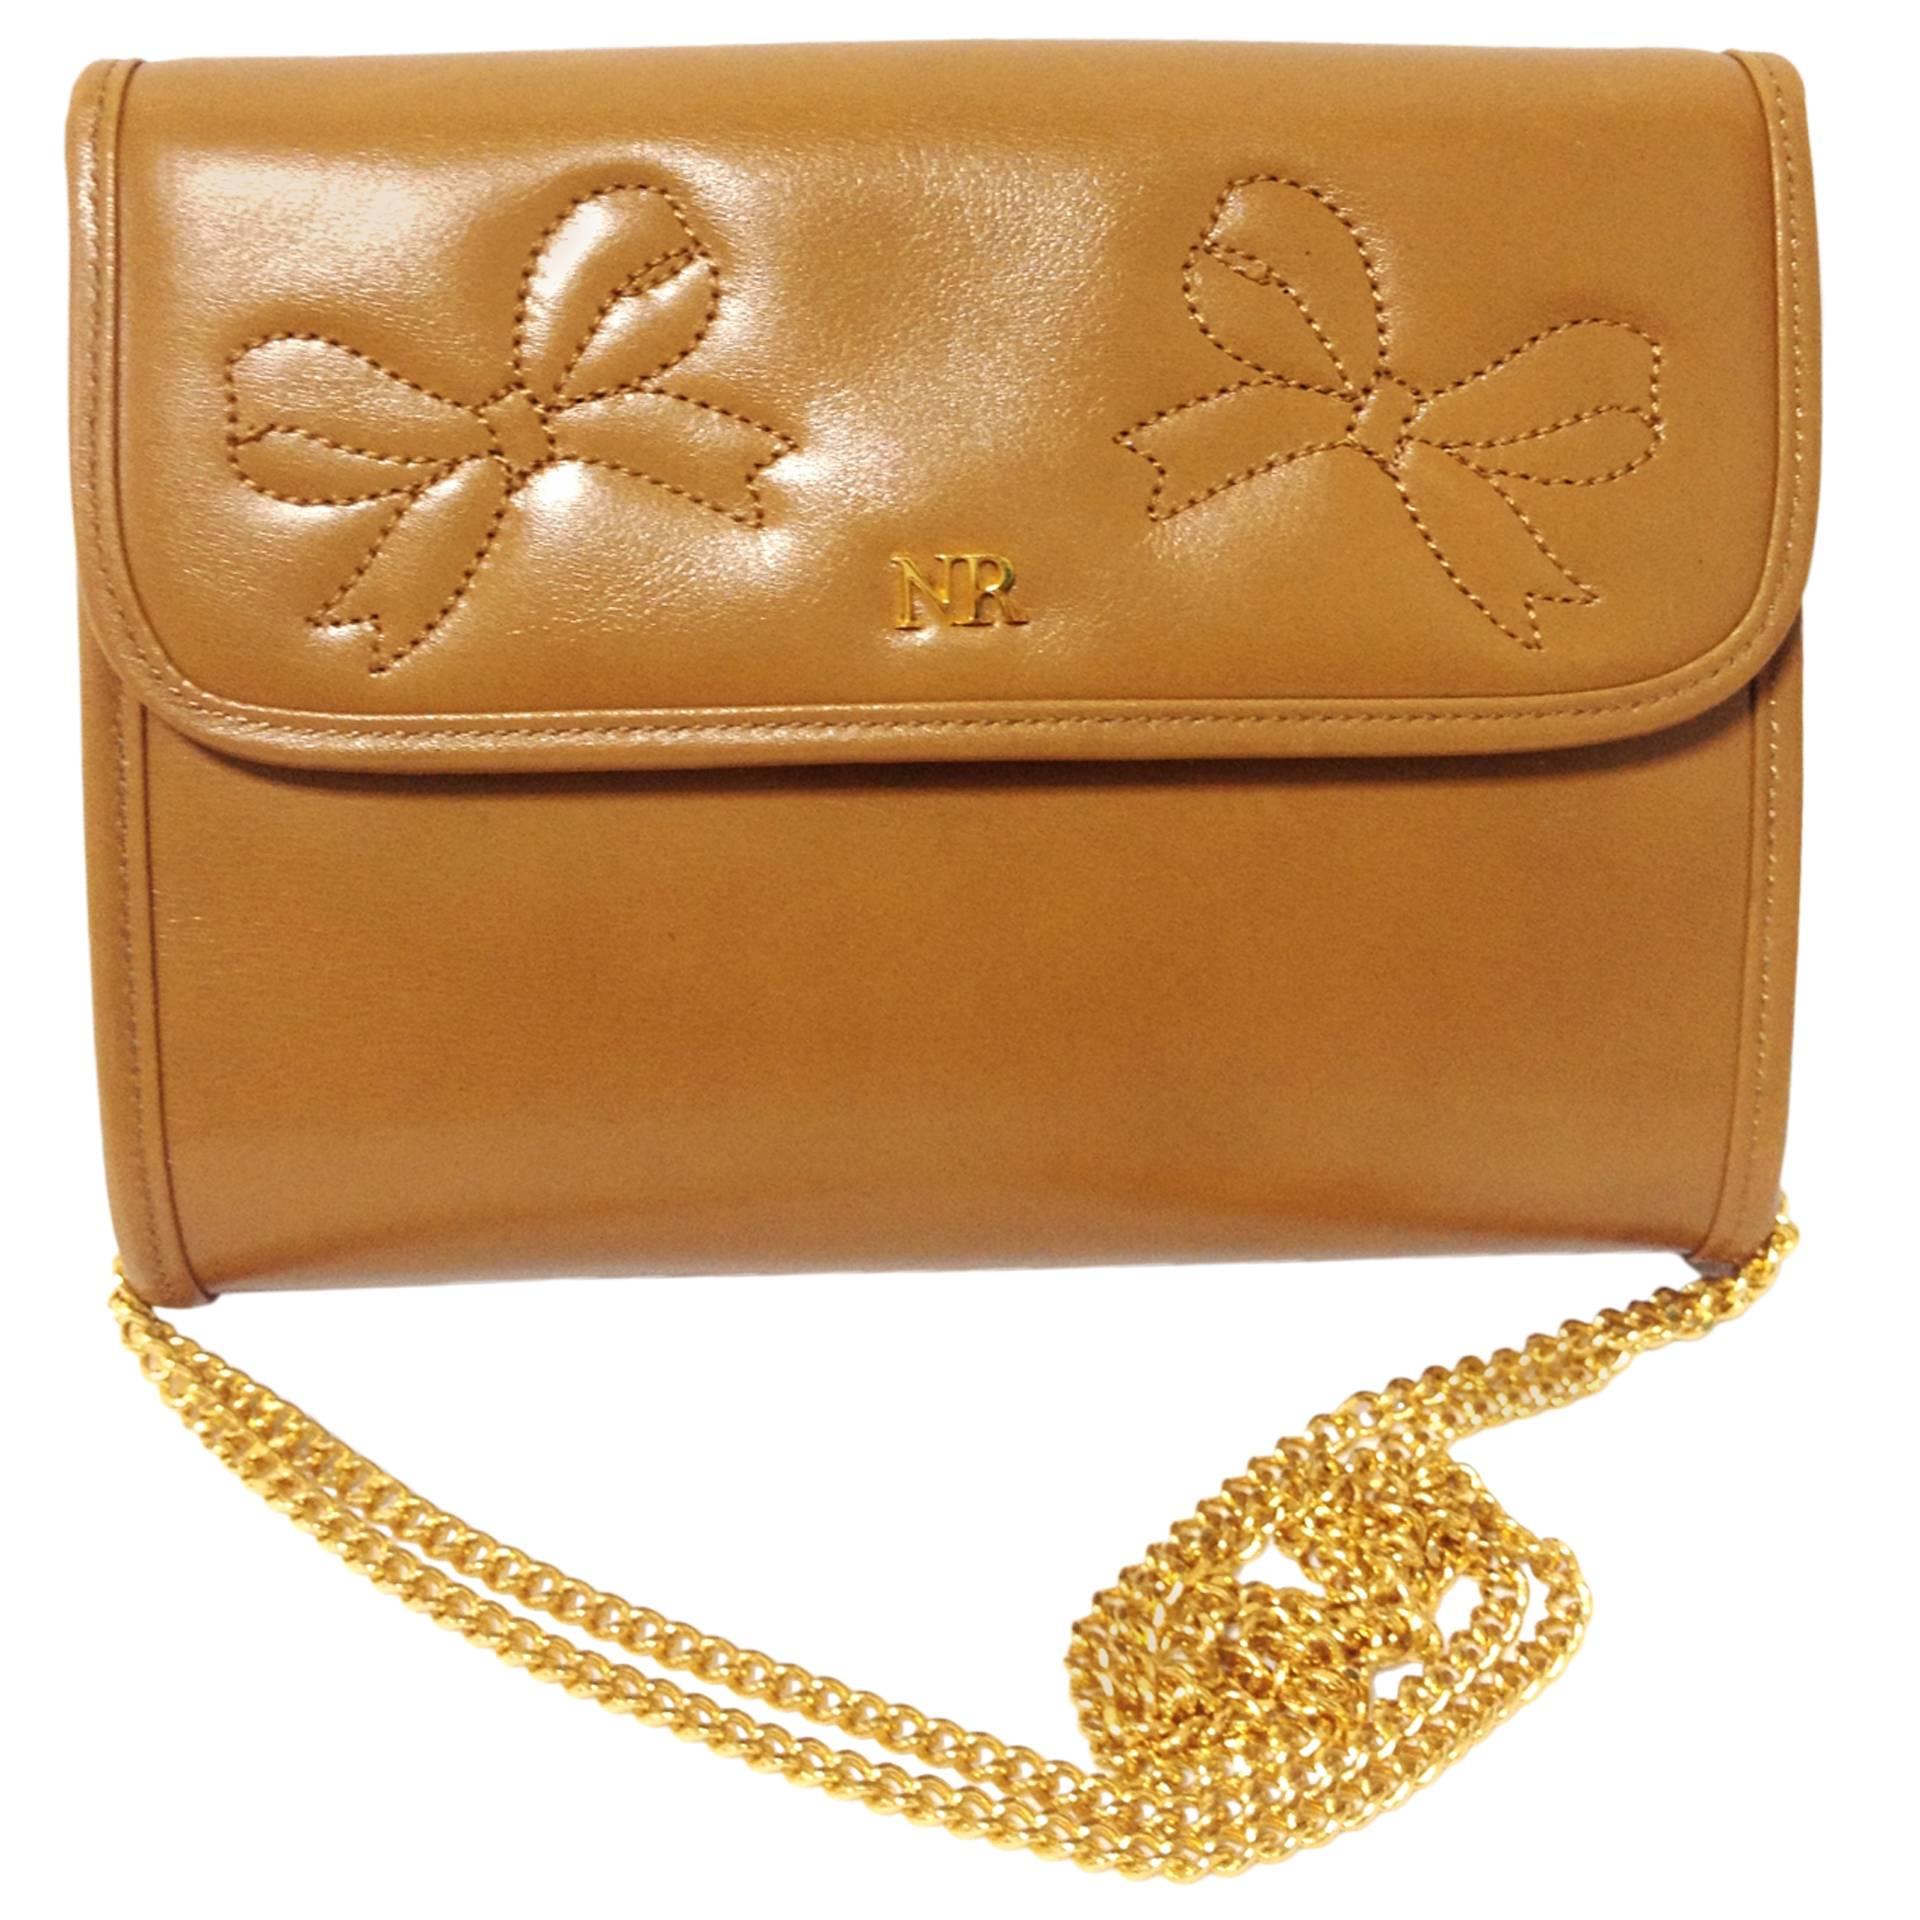 Vintage Nina Ricci tanned brown leather mini clutch shoulder bag with gold chain For Sale